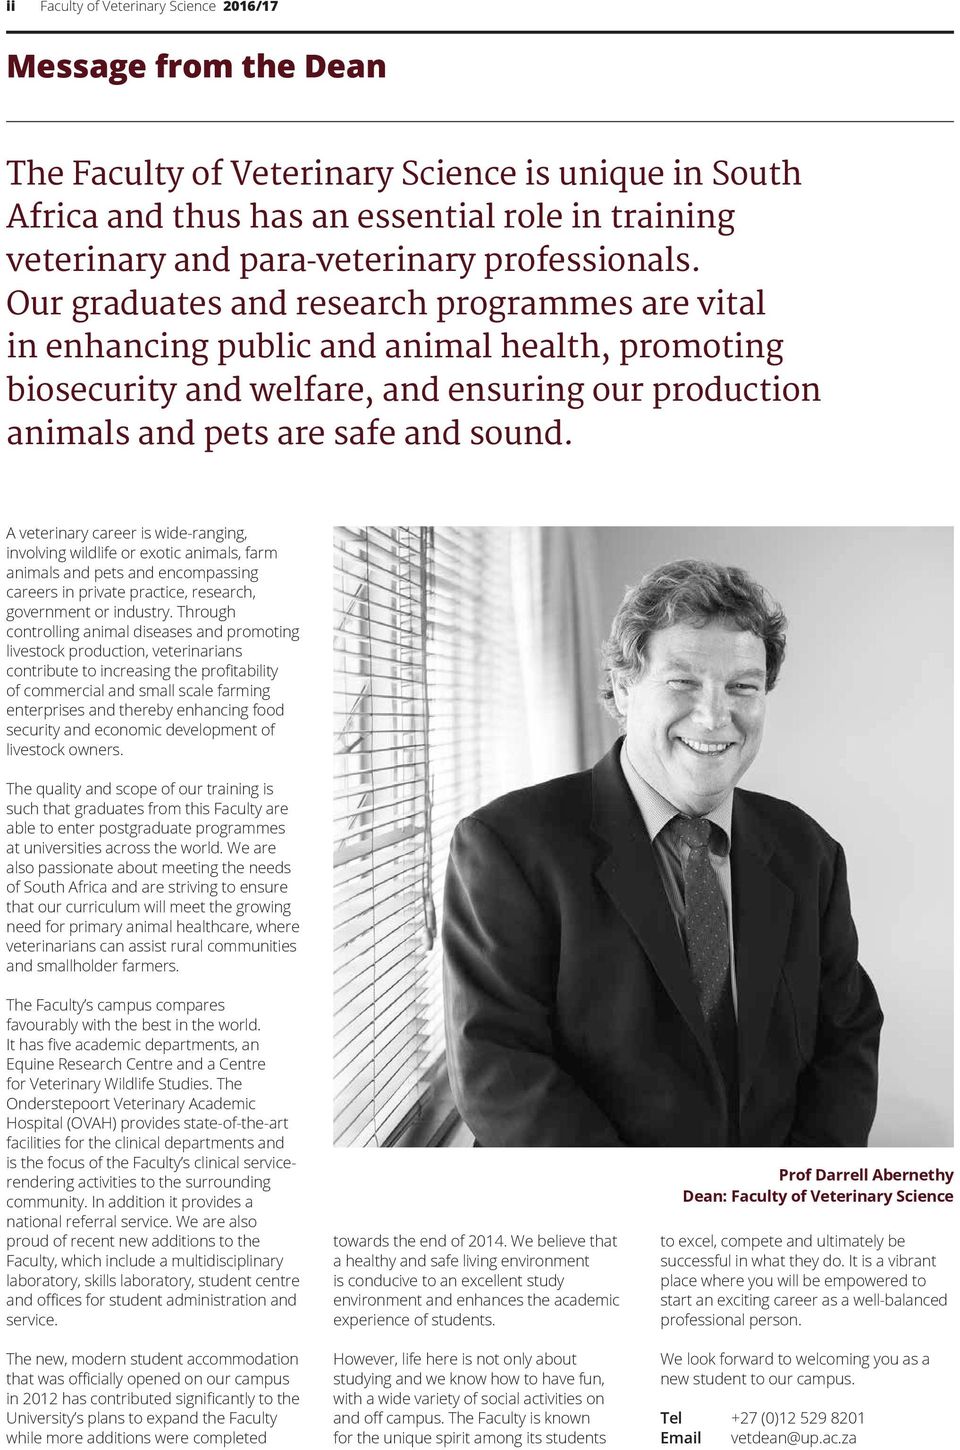 Our graduates and research programmes are vital in enhancing public and animal health, promoting biosecurity and welfare, and ensuring our production animals and pets are safe and sound.